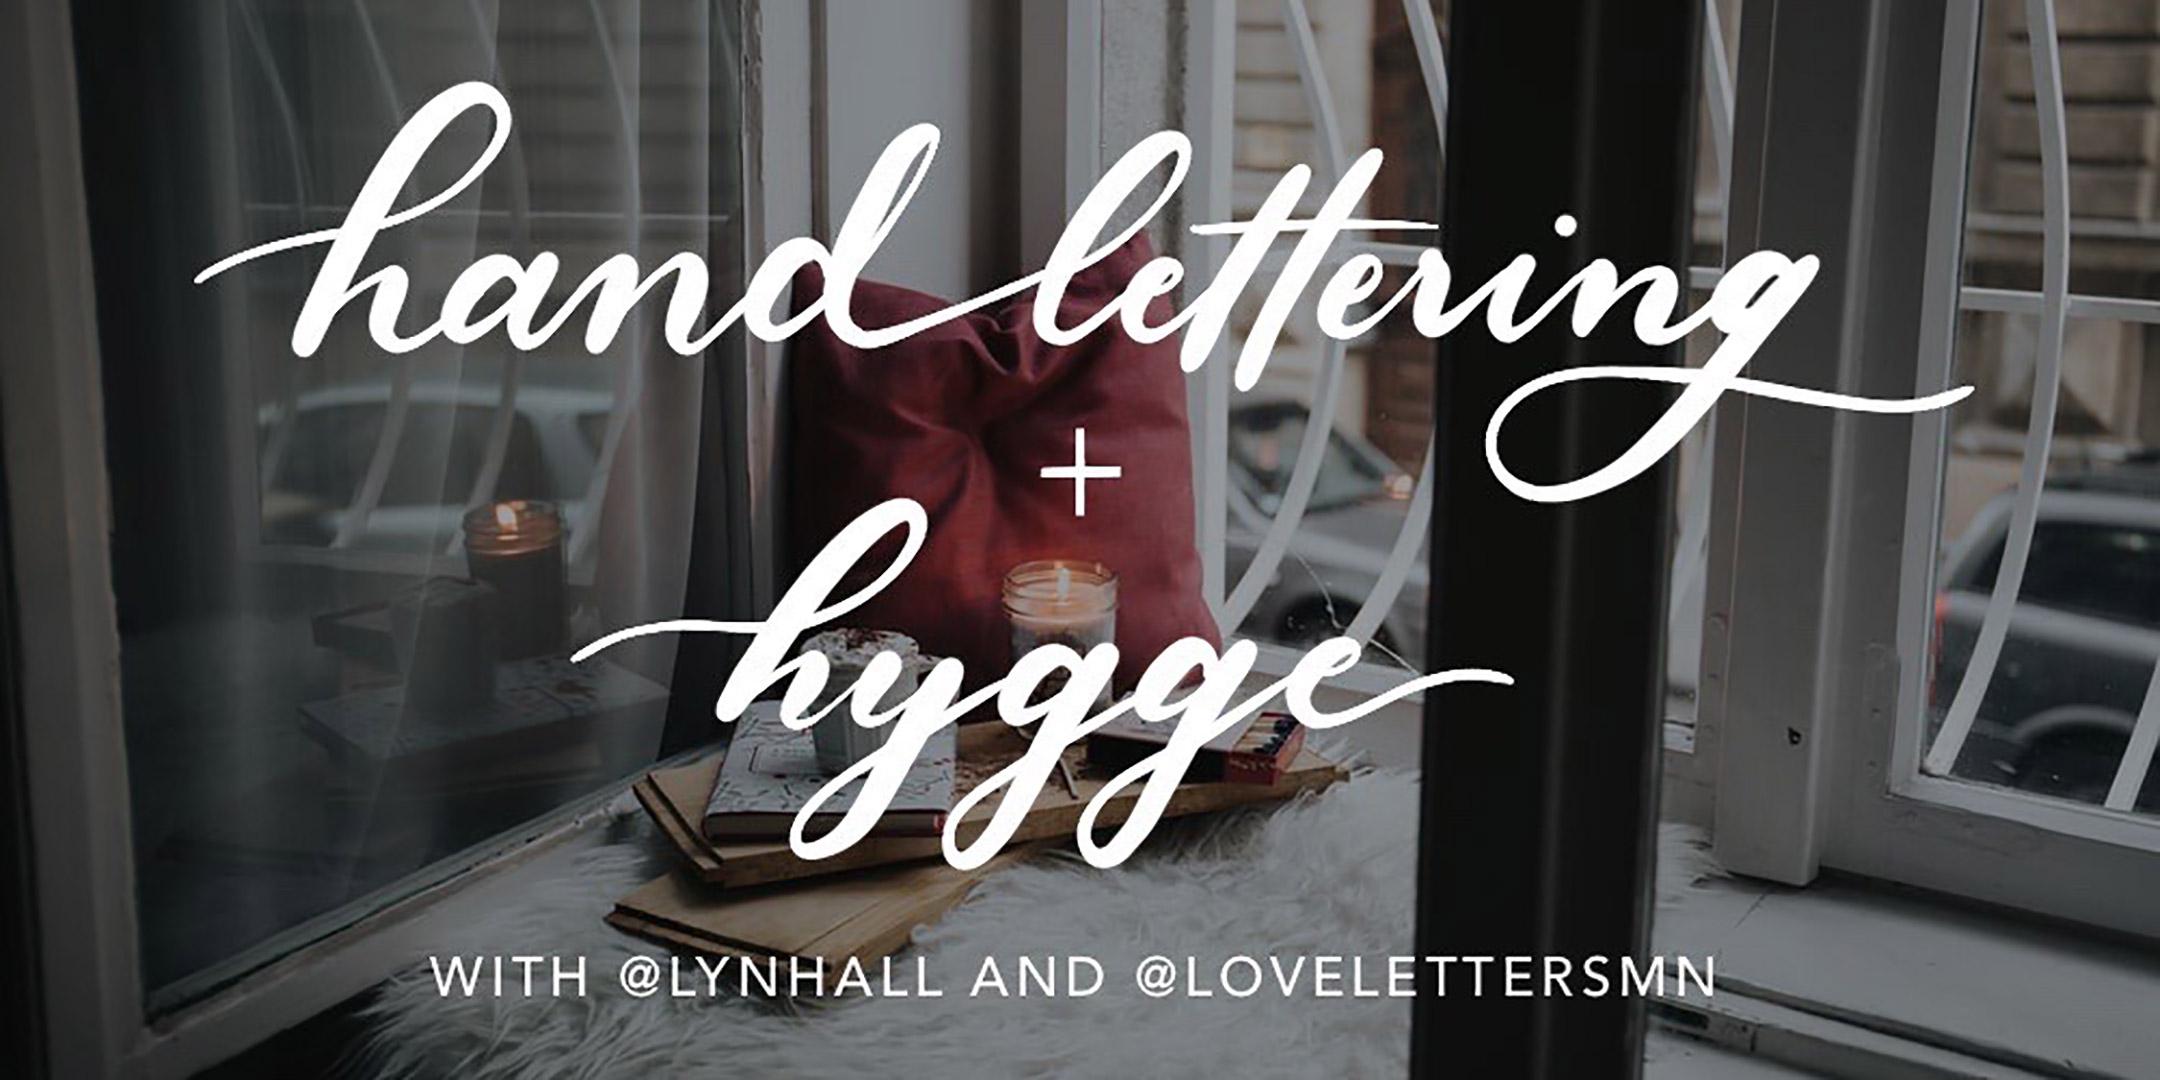 Hand Lettering and Hygge